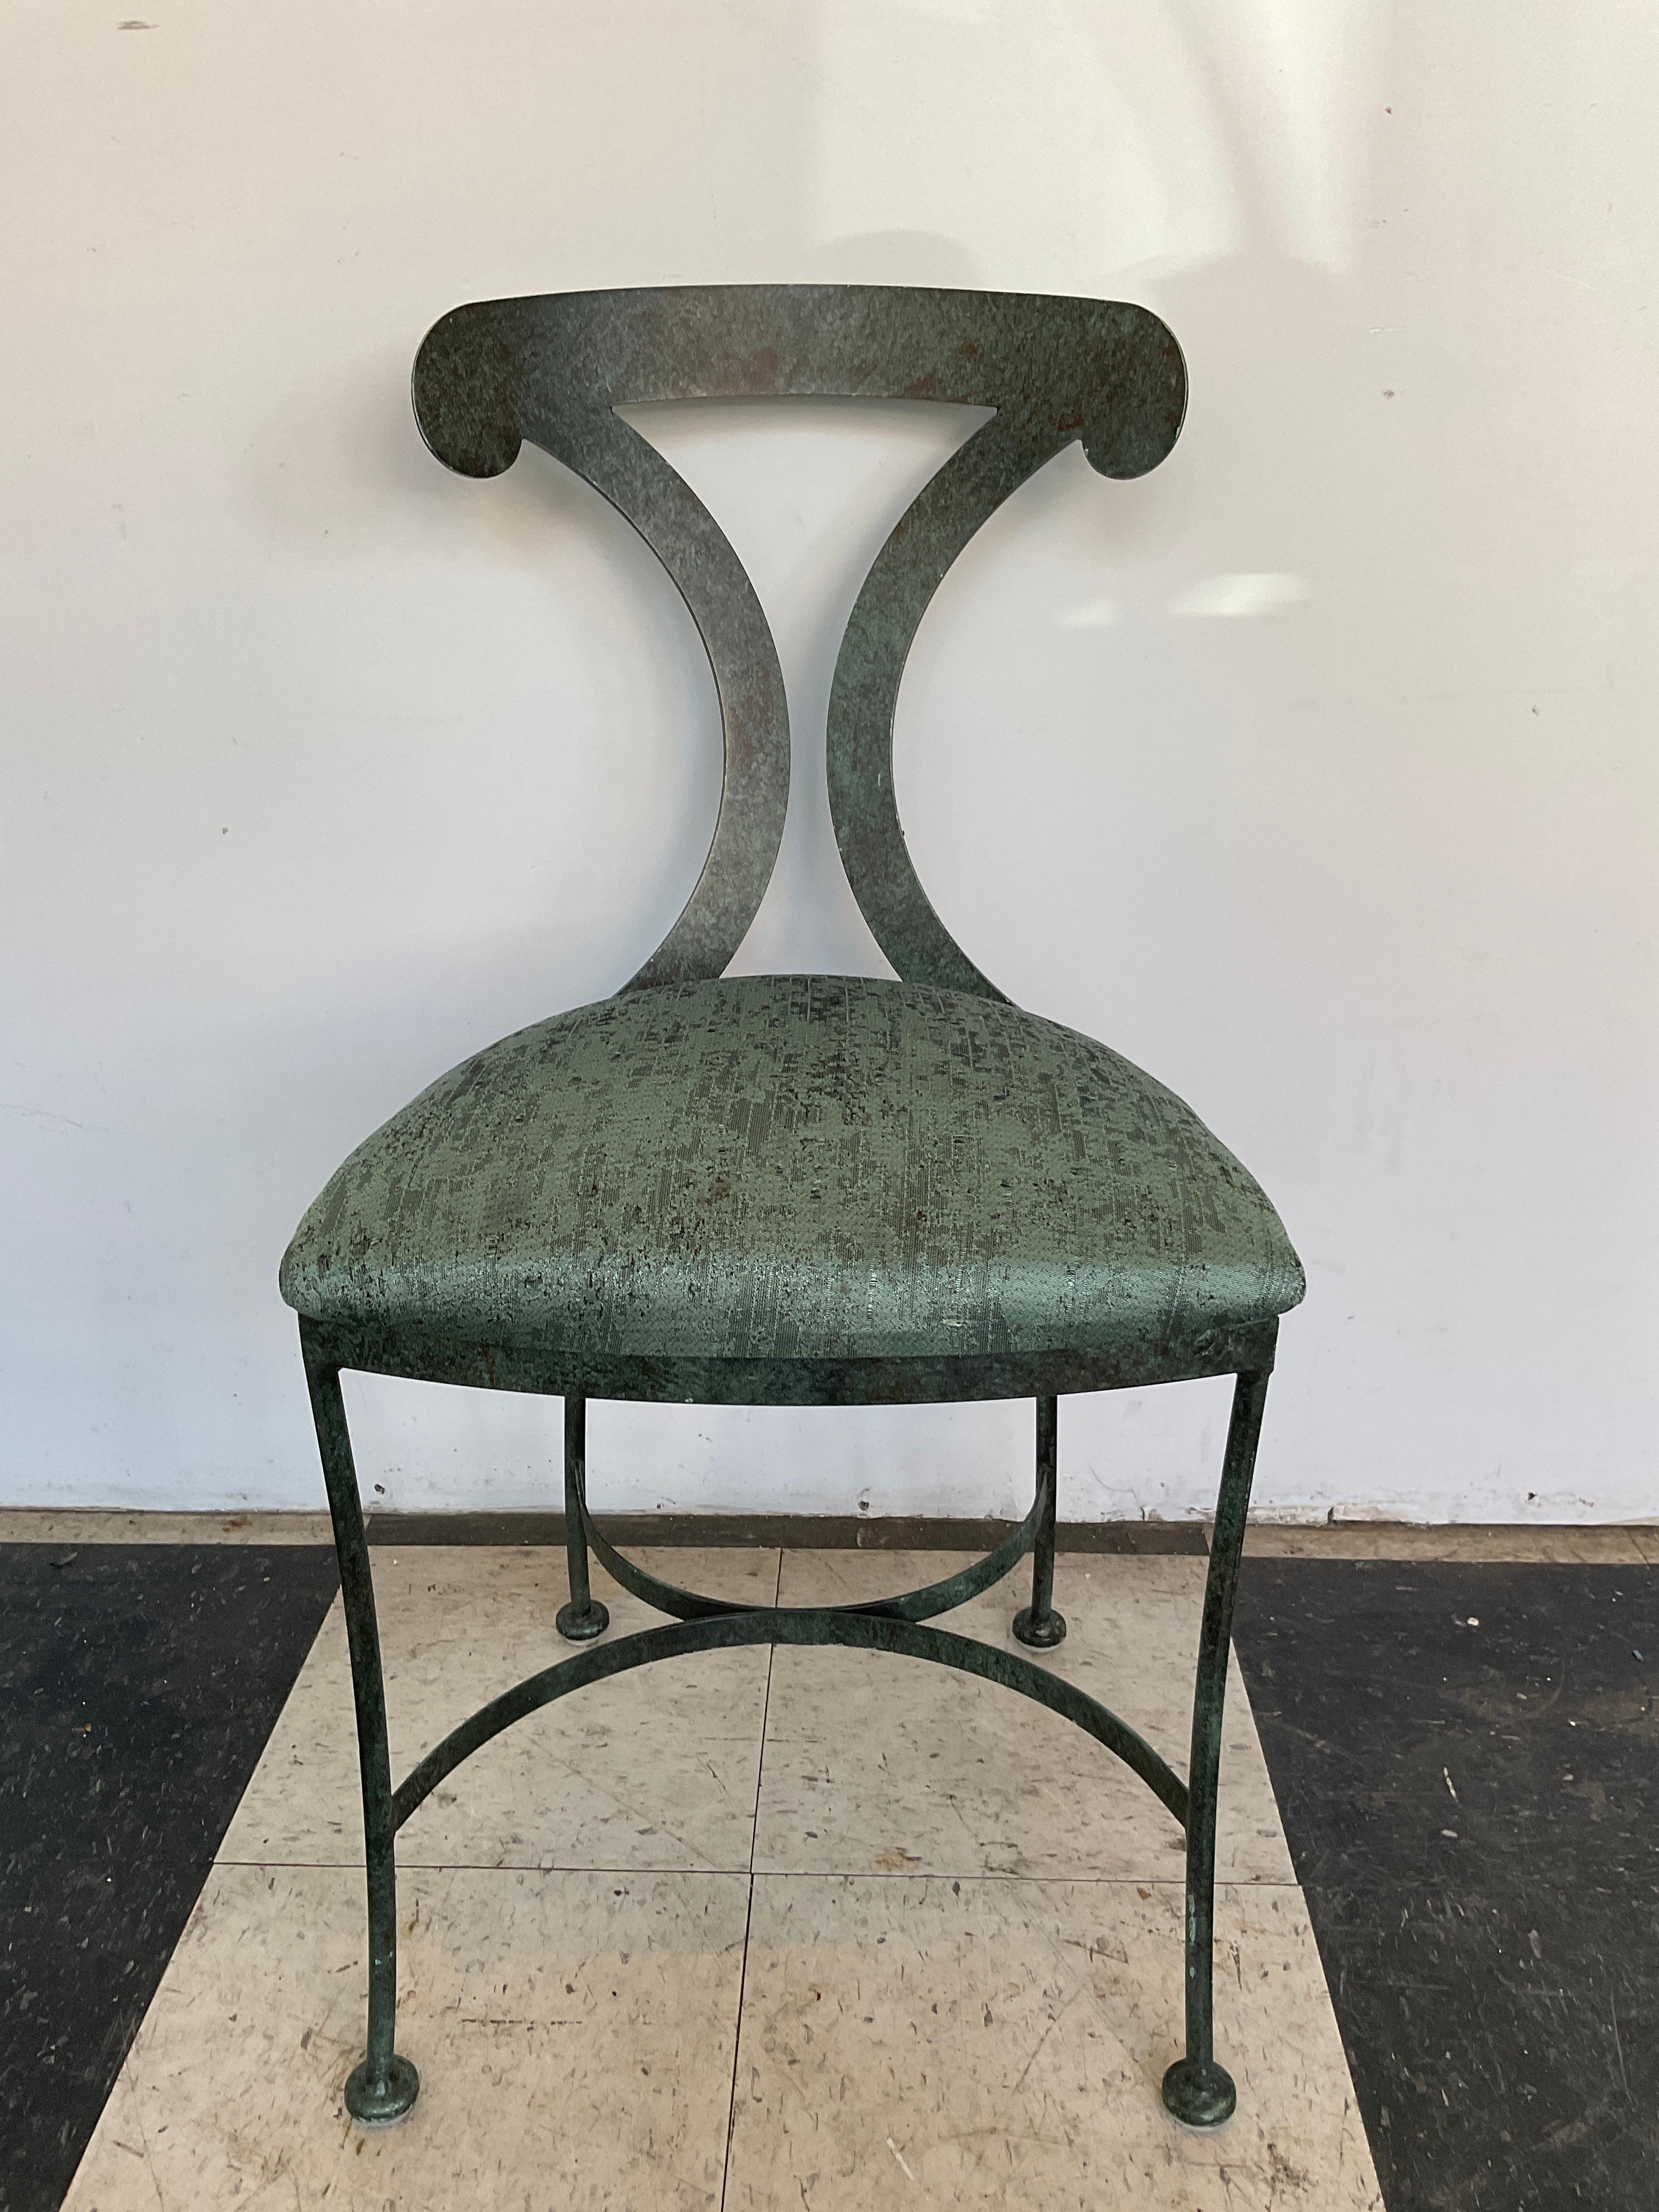 12, 1990s Steel Klismos chairs Green patinated. Chairs can be painted. SOLD IN PAIRS. 800.00 per pair.